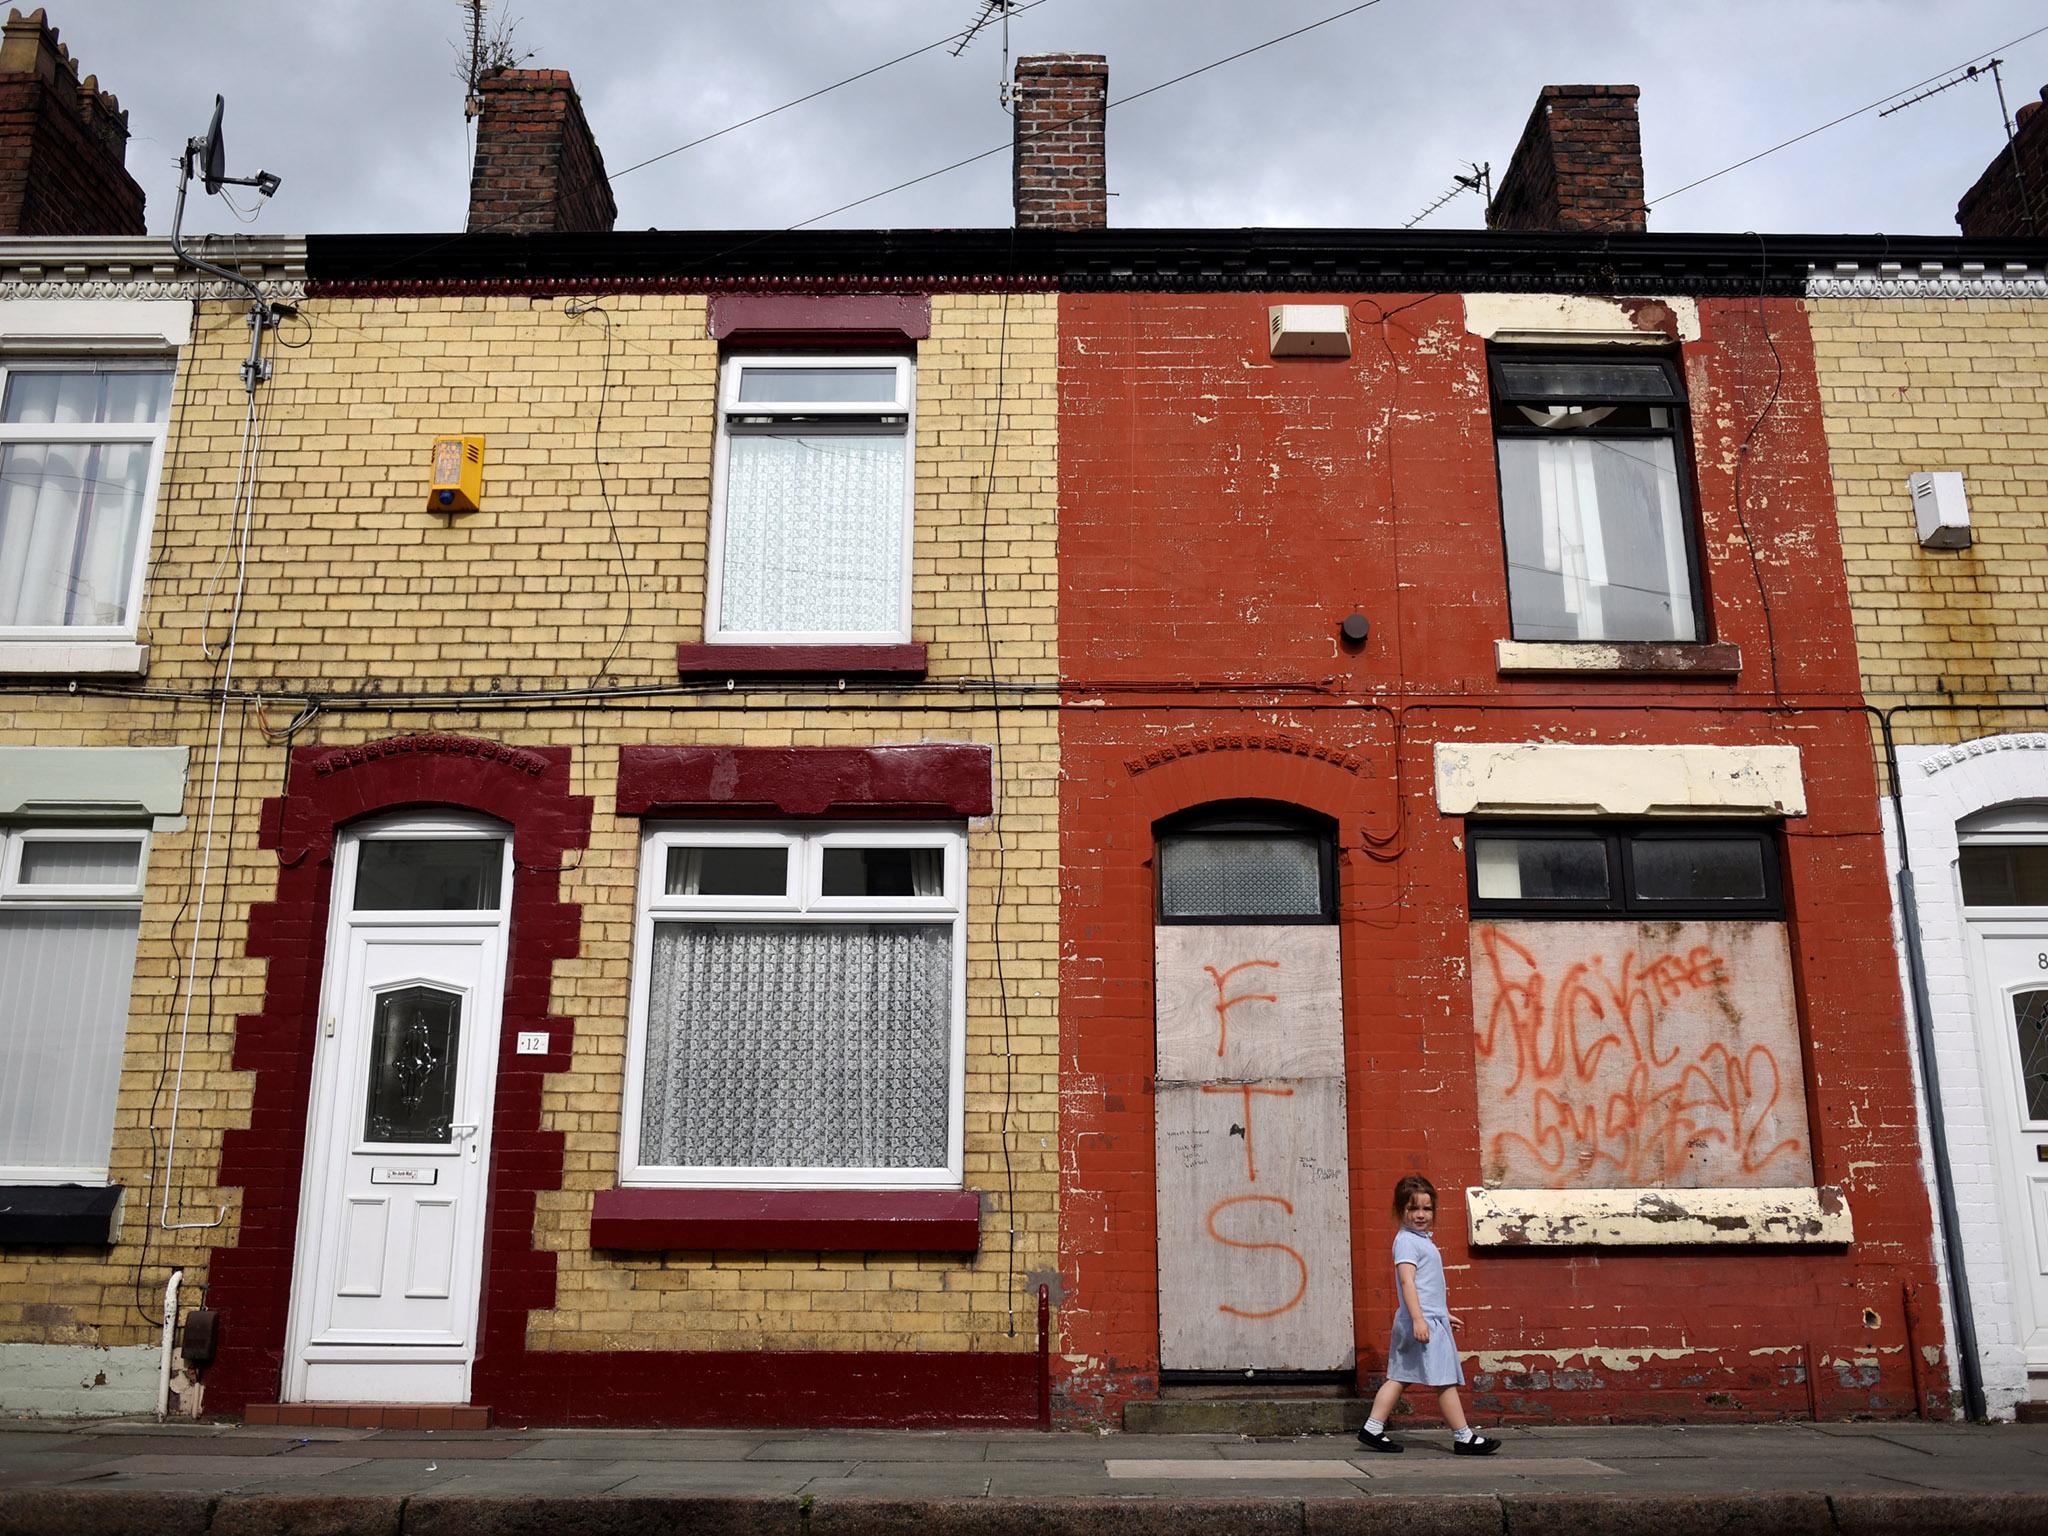 A young girl walks along a residential street in Kensington in Liverpool